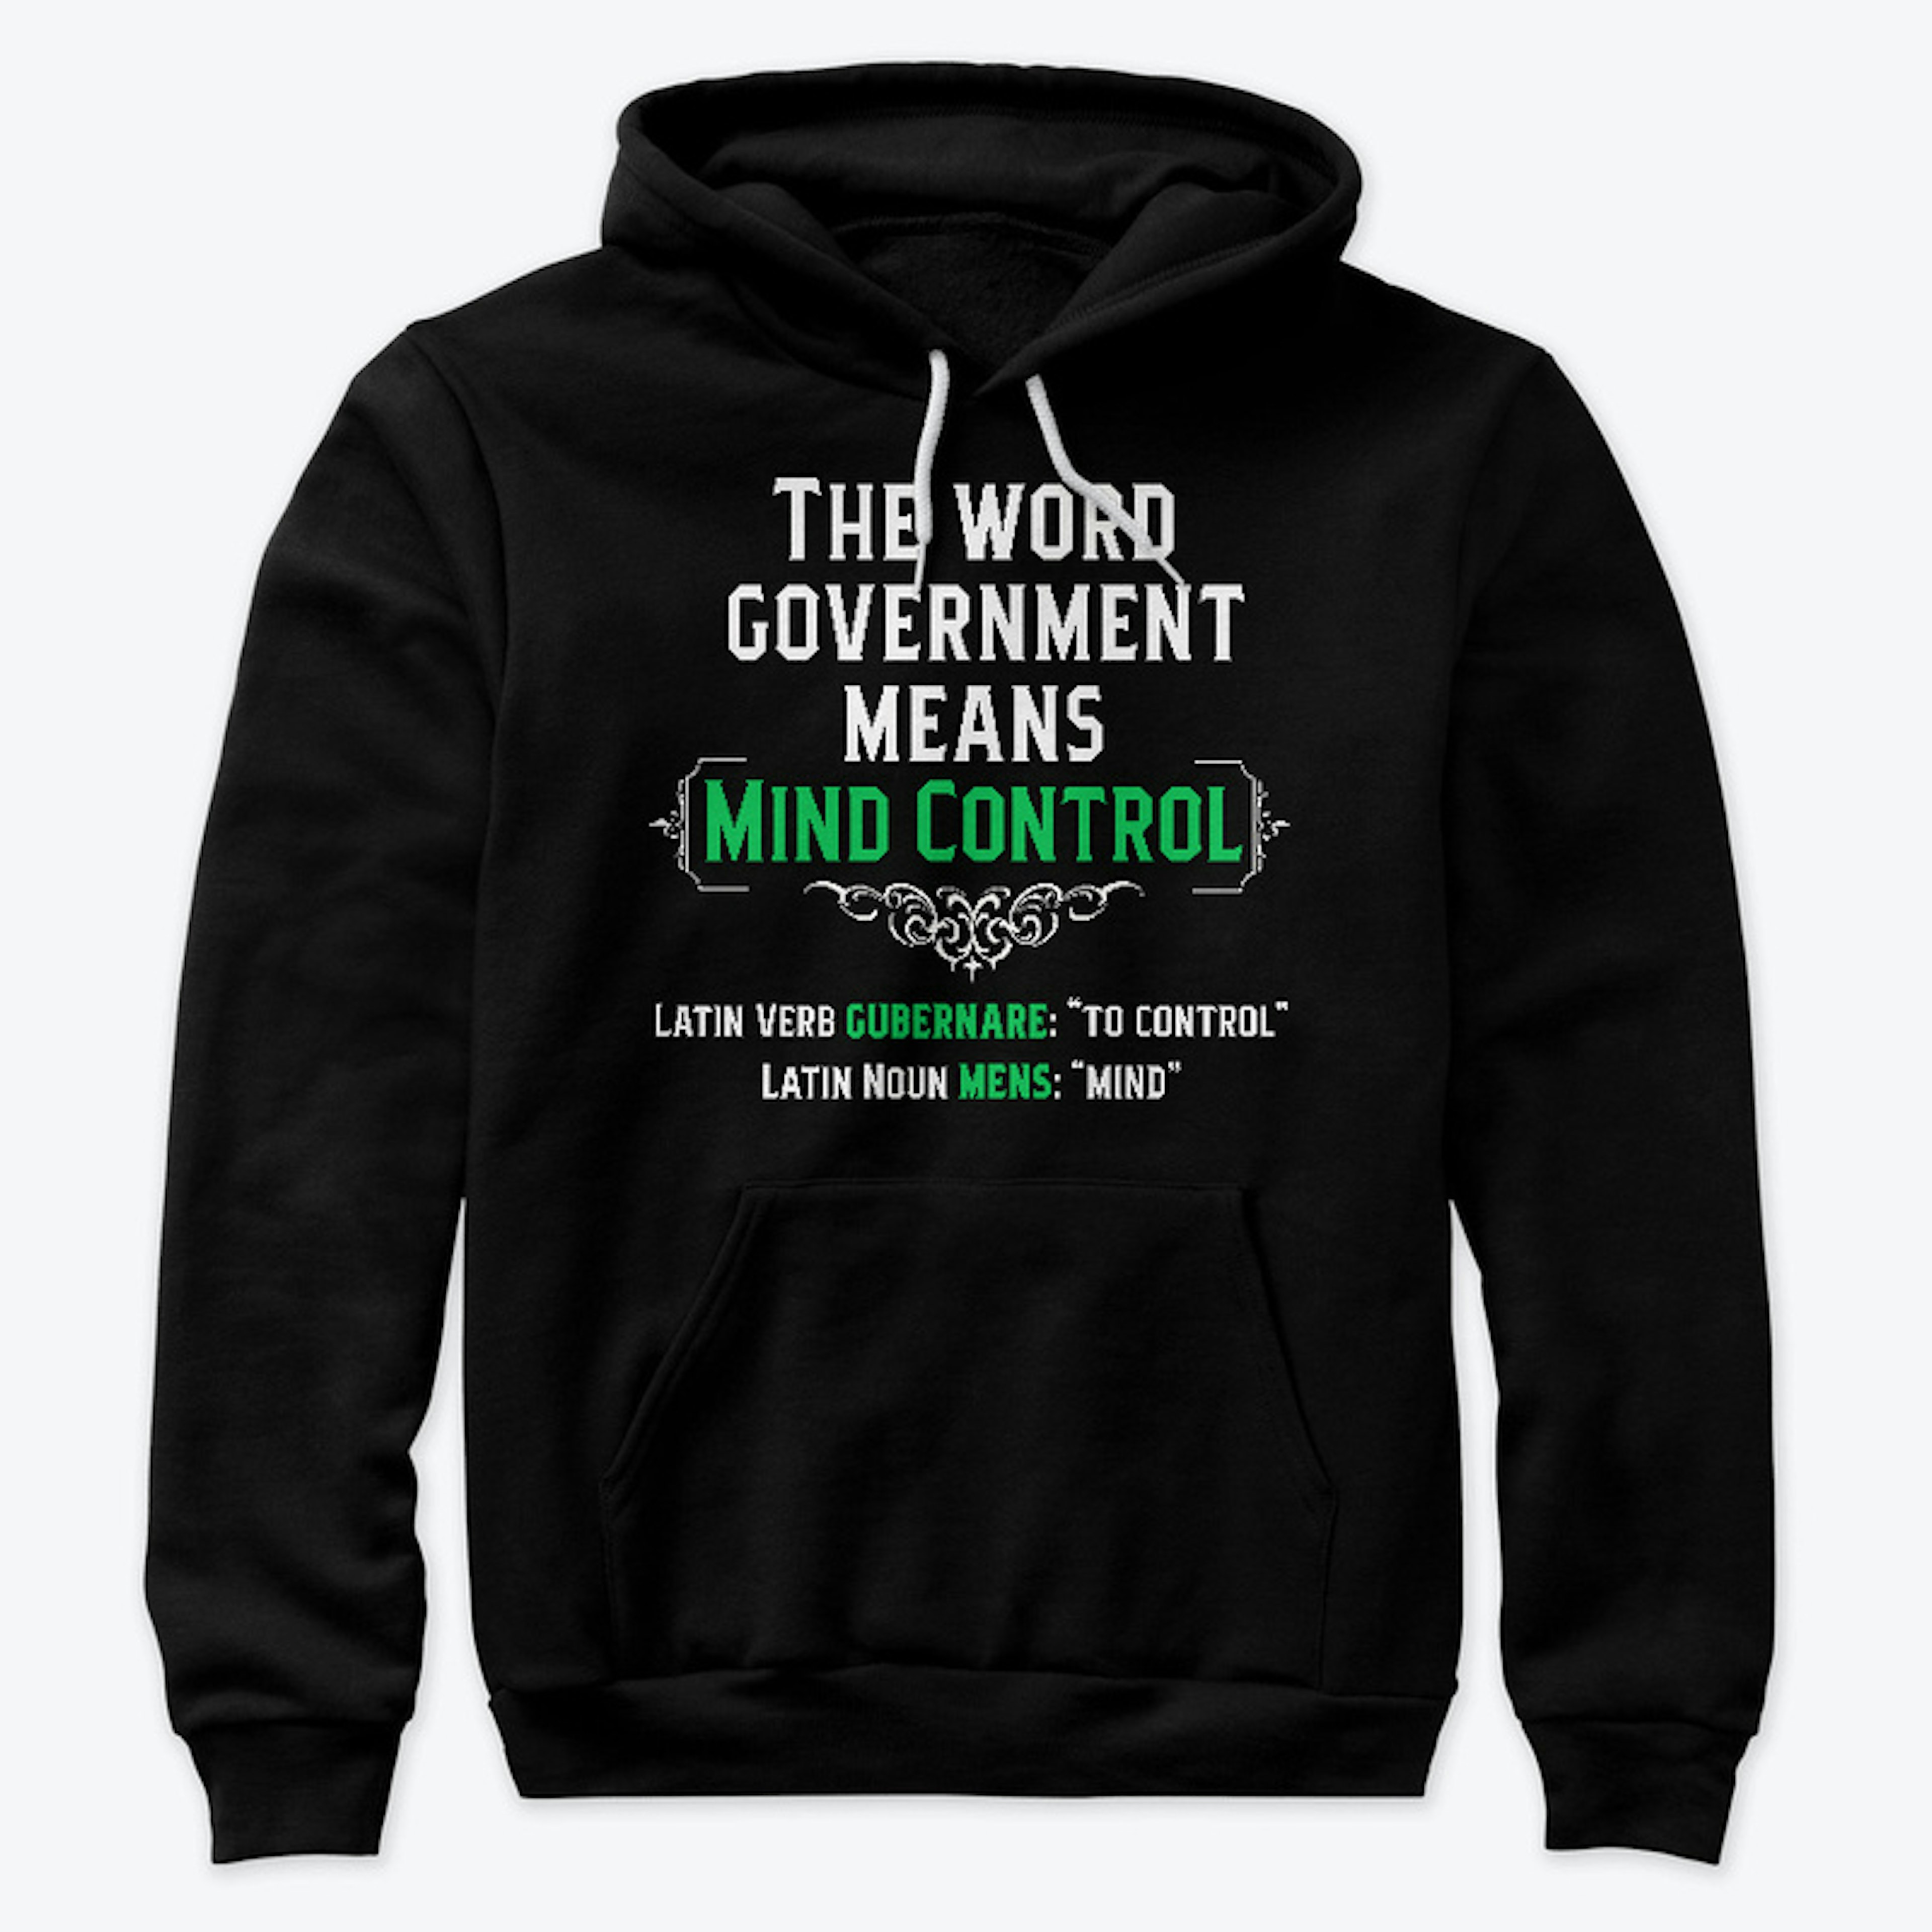 The Word Government (Black)